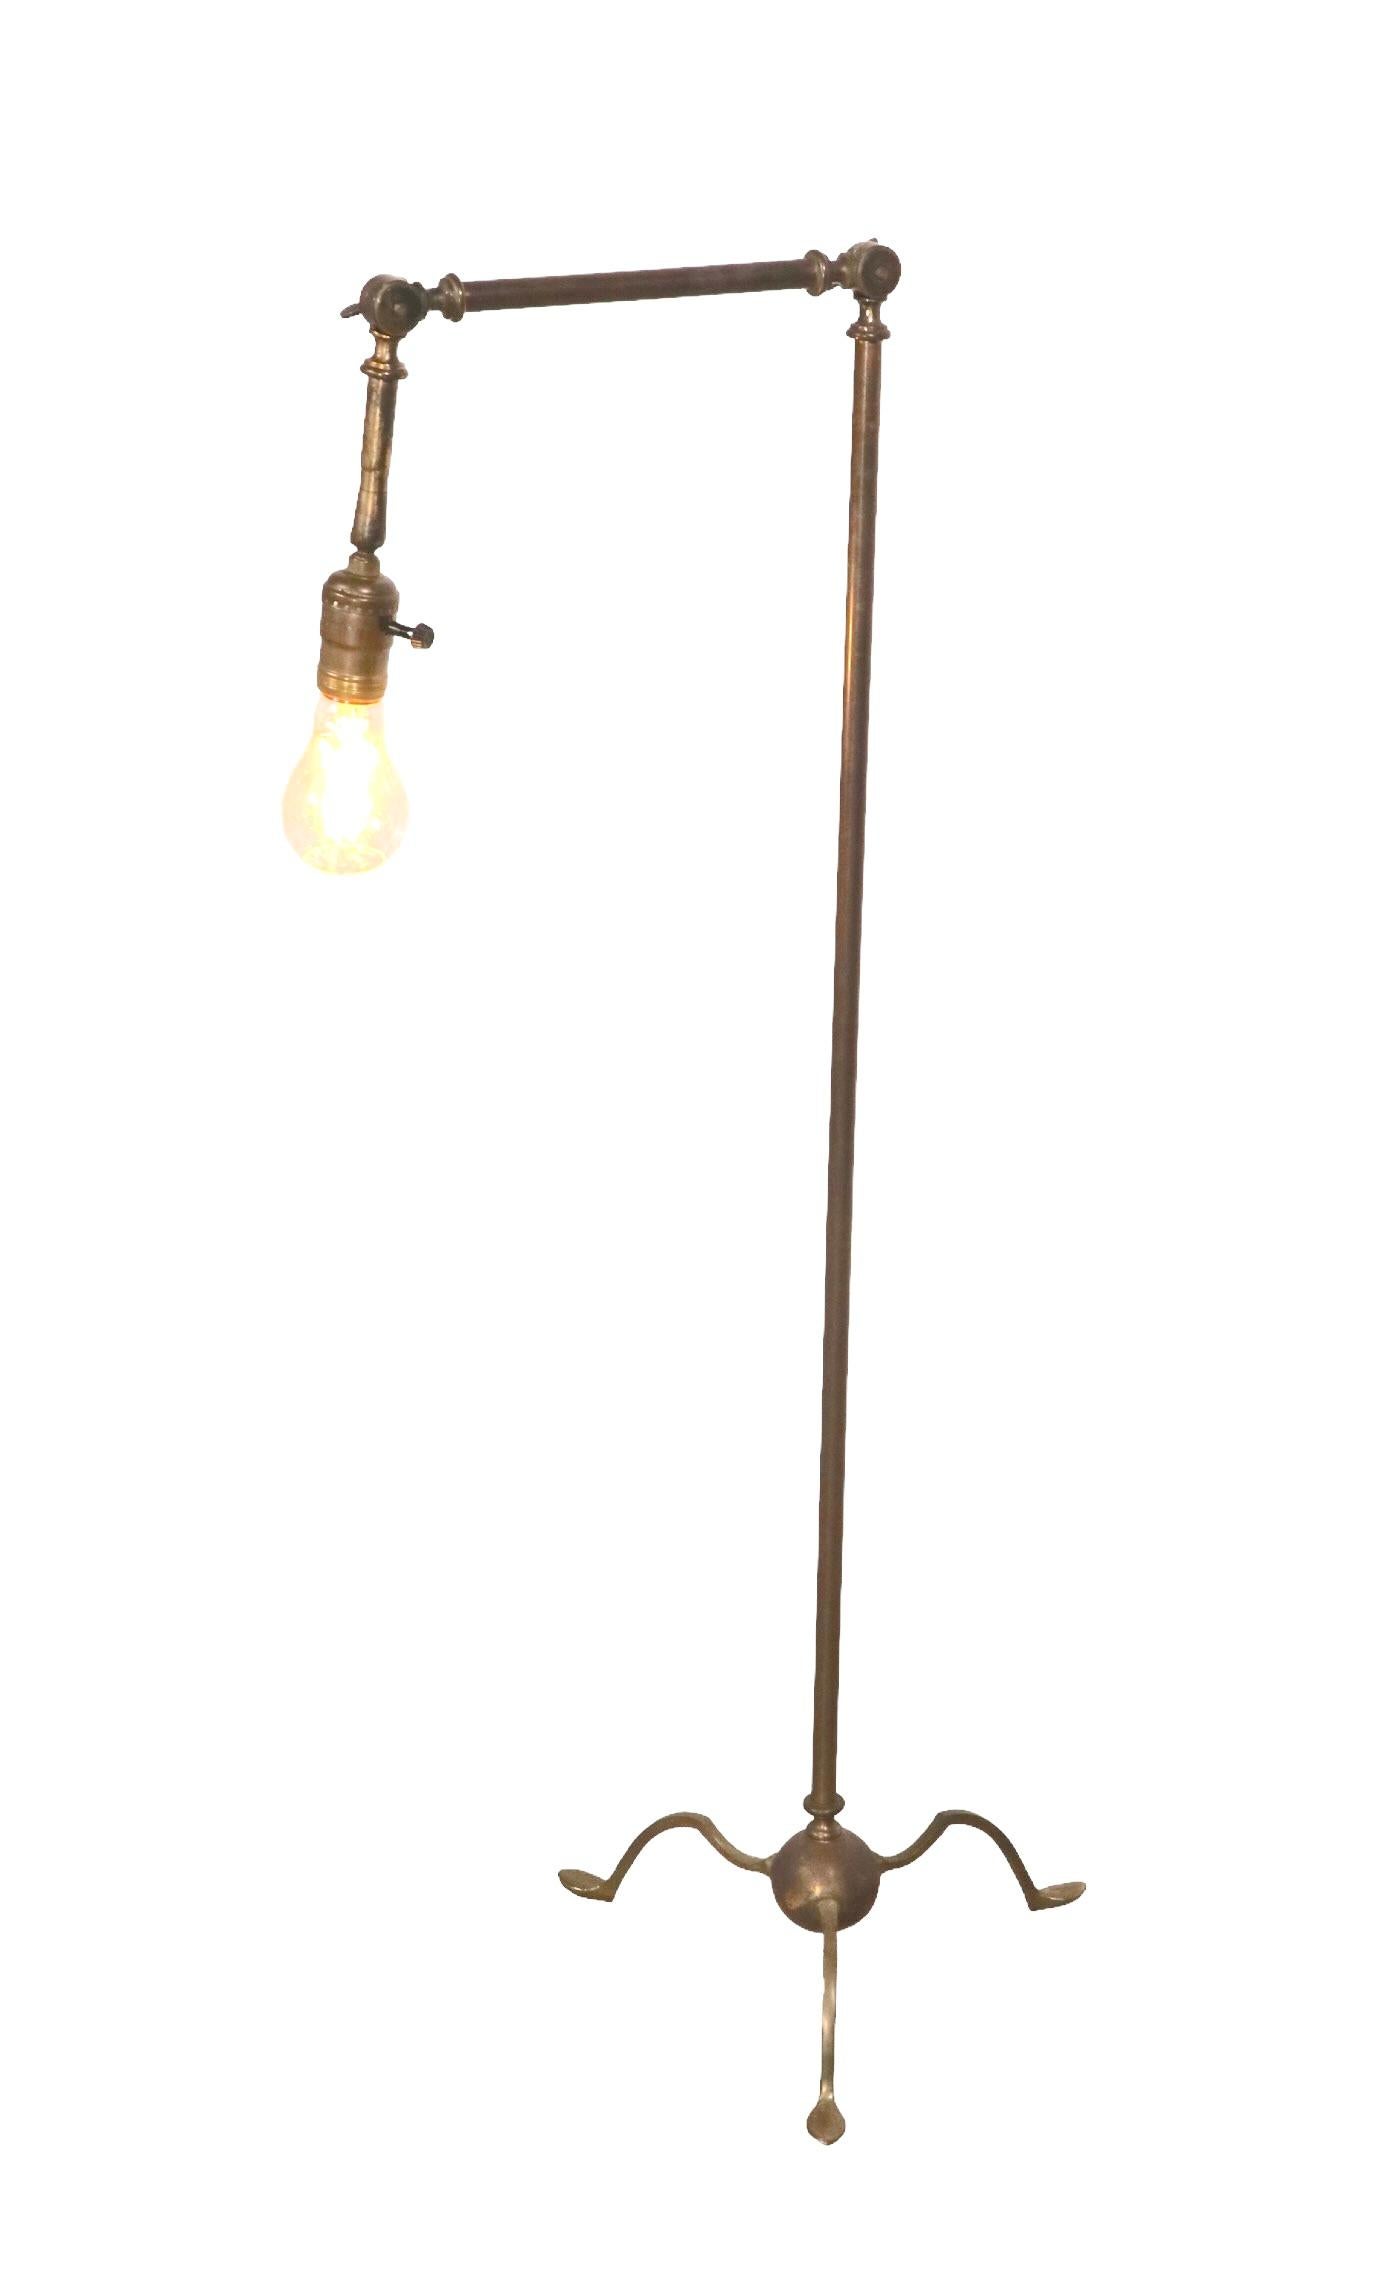 Articulating Brass Reading Floor Lamp in the Classical Style, C. 1900- 1930's For Sale 2